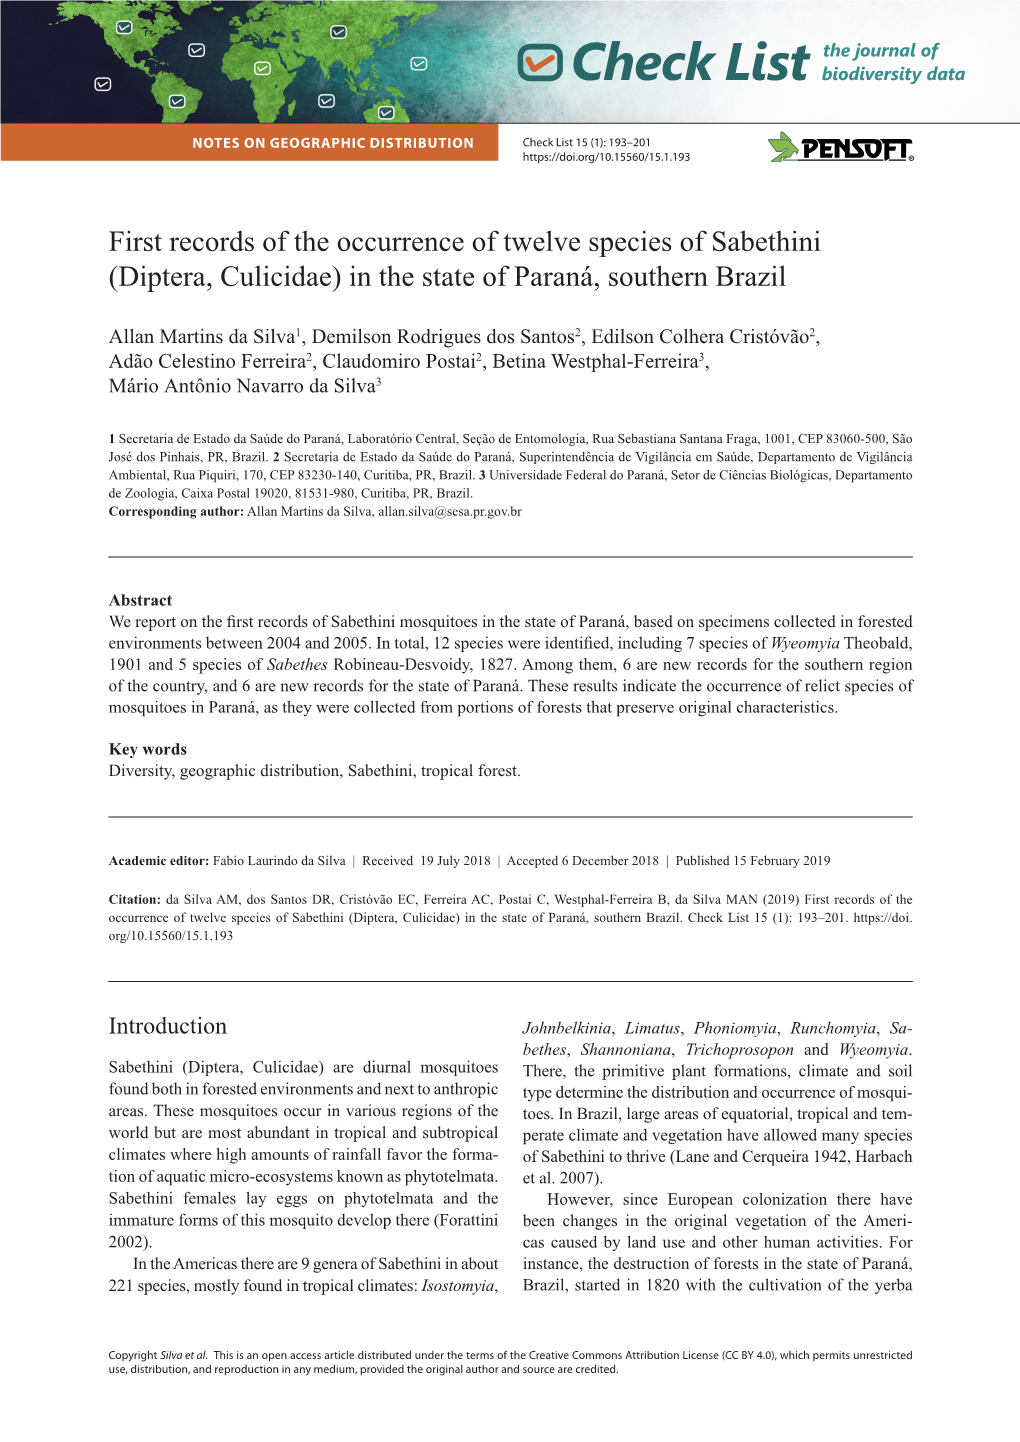 First Records of the Occurrence of Twelve Species of Sabethini (Diptera, Culicidae) in the State of Paraná, Southern Brazil